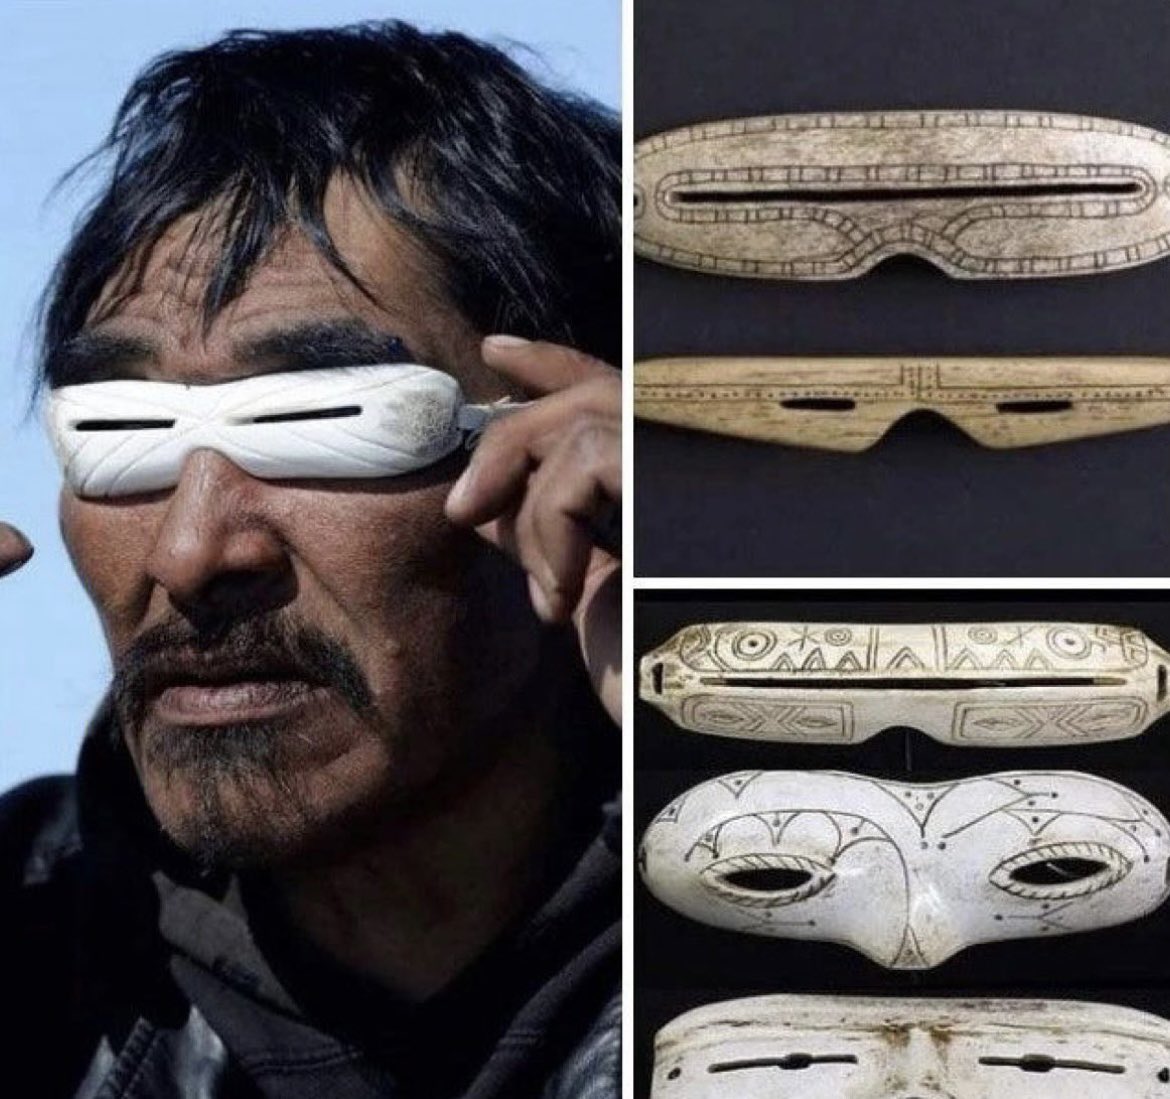 Centuries ago, approximately 800 years prior, the indigenous Inuit and Yupik communities residing in Alaska and northern regions of Canada ingeniously crafted small apertures on ivory and antler materials to fashion snow goggles. This innovative creation served the purpose of